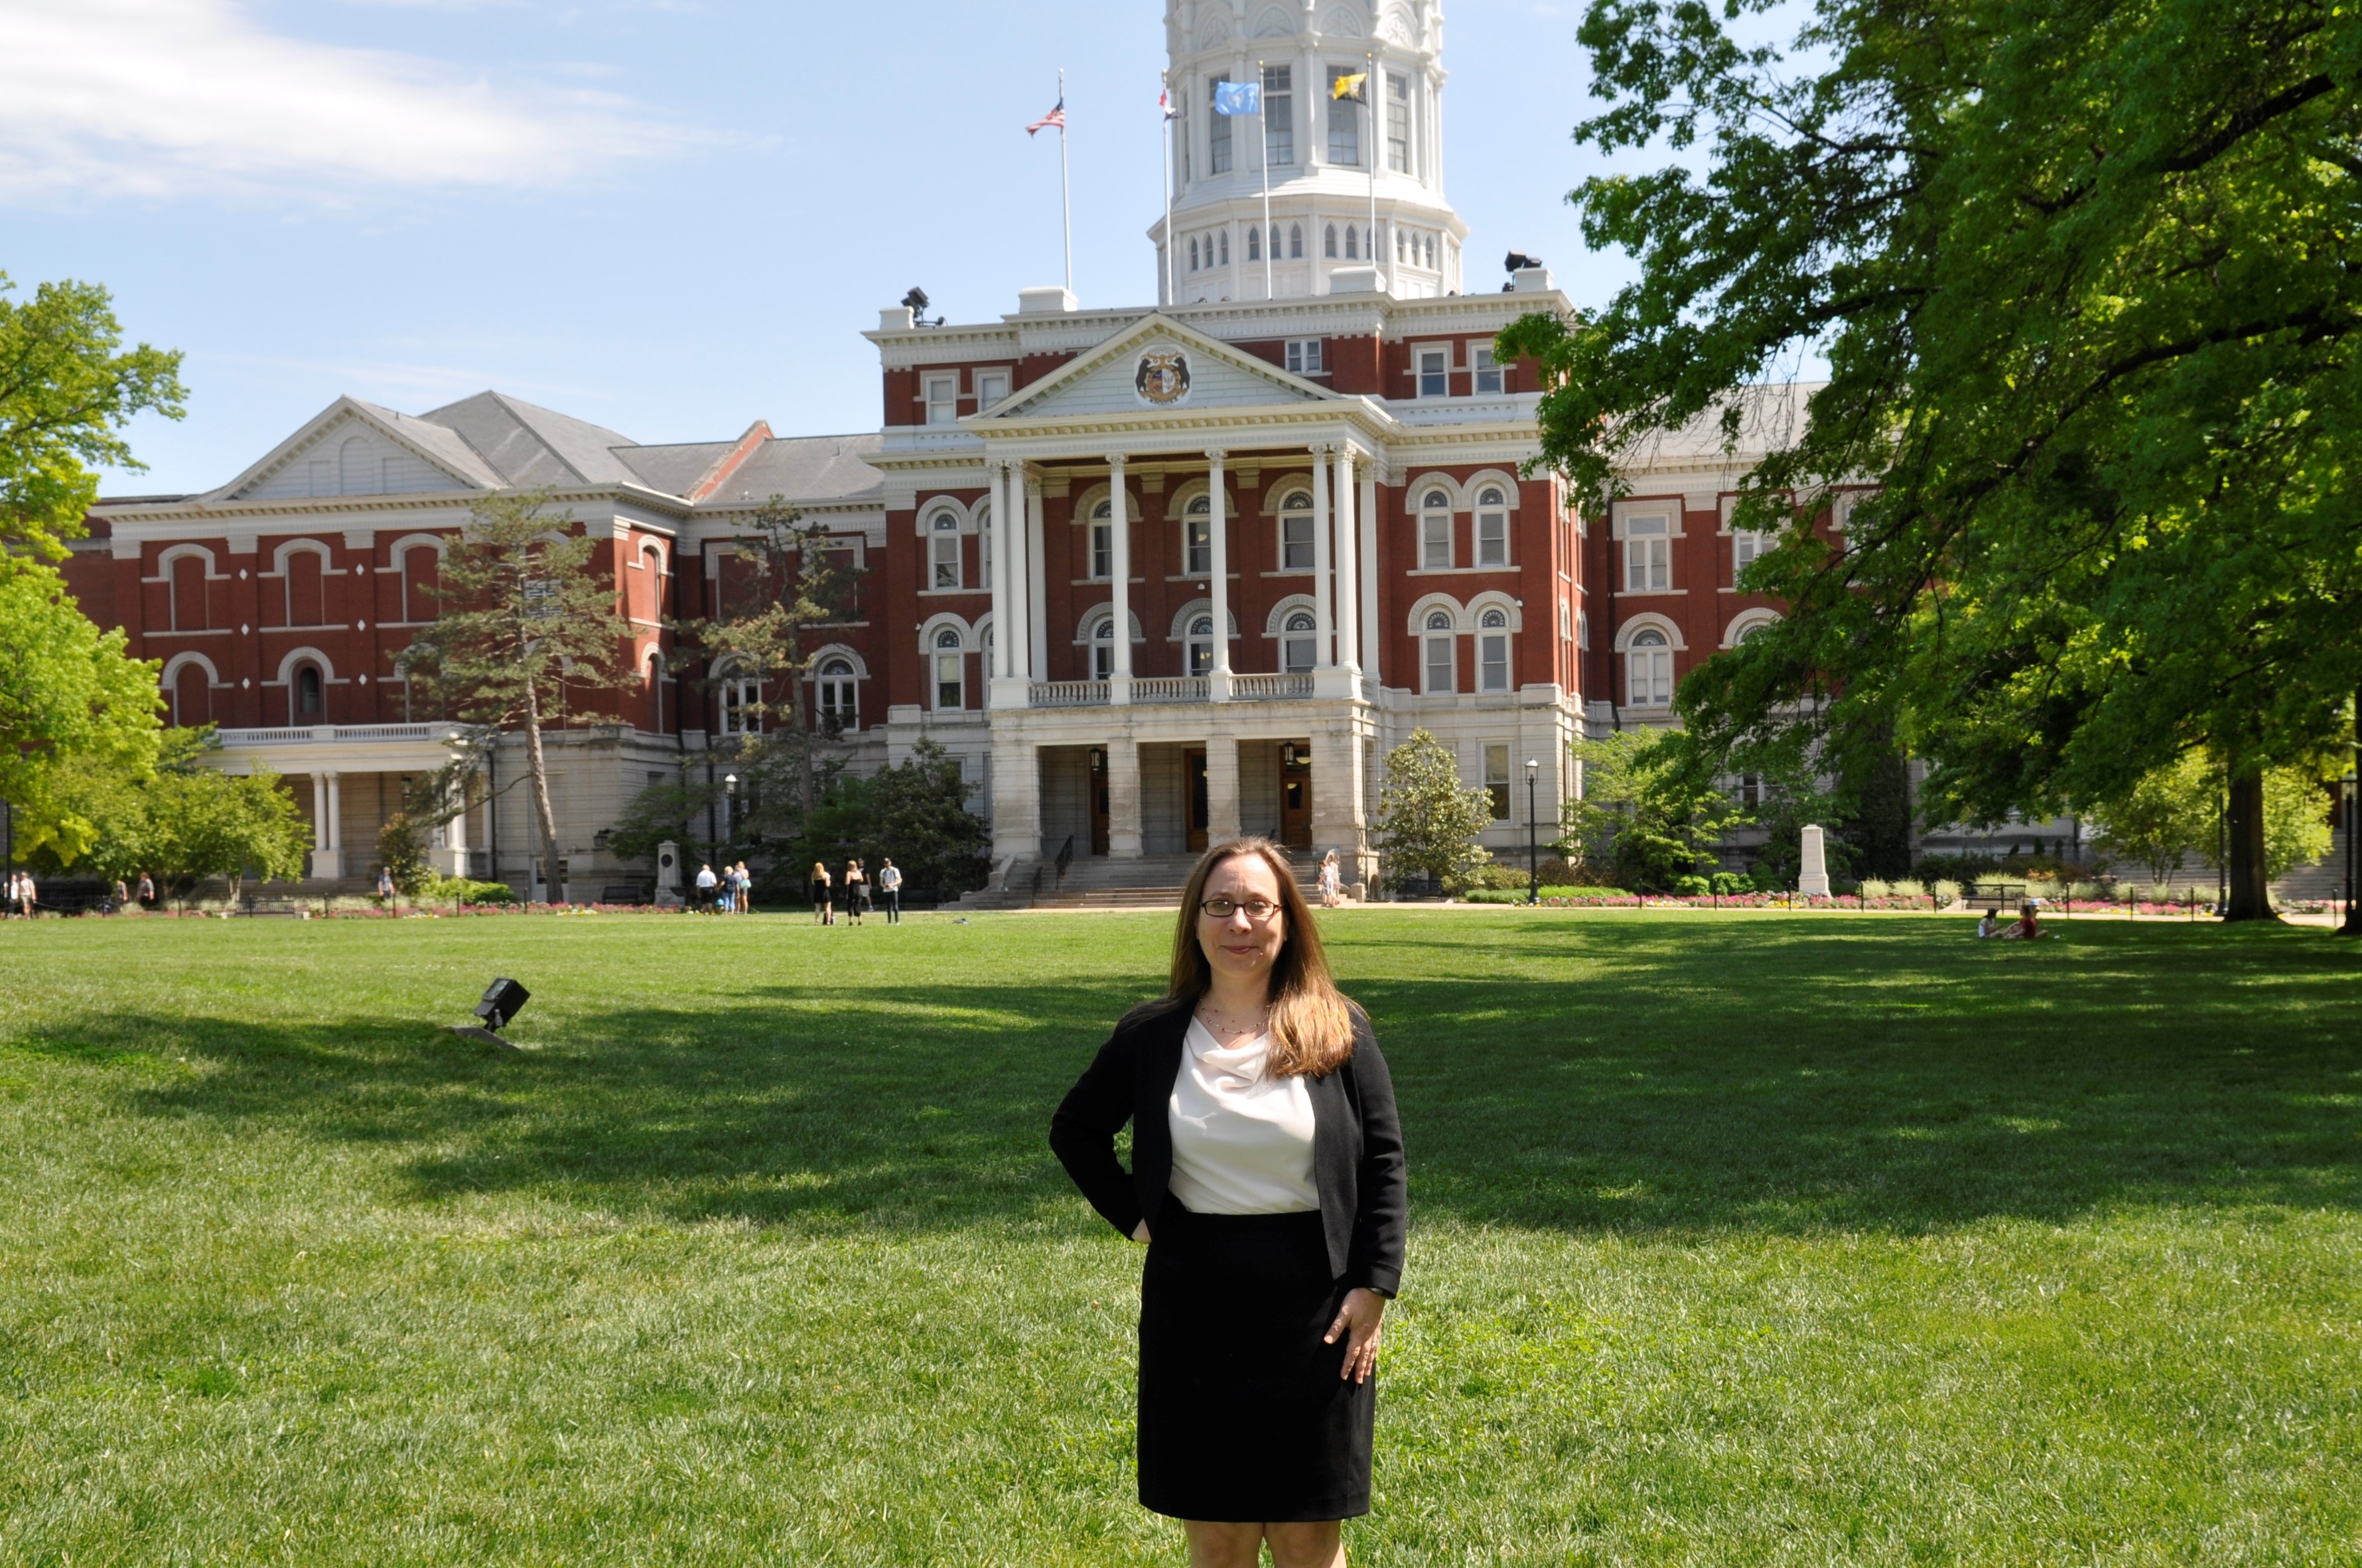 Associate professor of communication Rebecca J. Meisenbach, pictured here, has taught at Mizzou since 2006. Her research focuses on the issues of marginalized identity and ethics at both organizational and individual levels. 